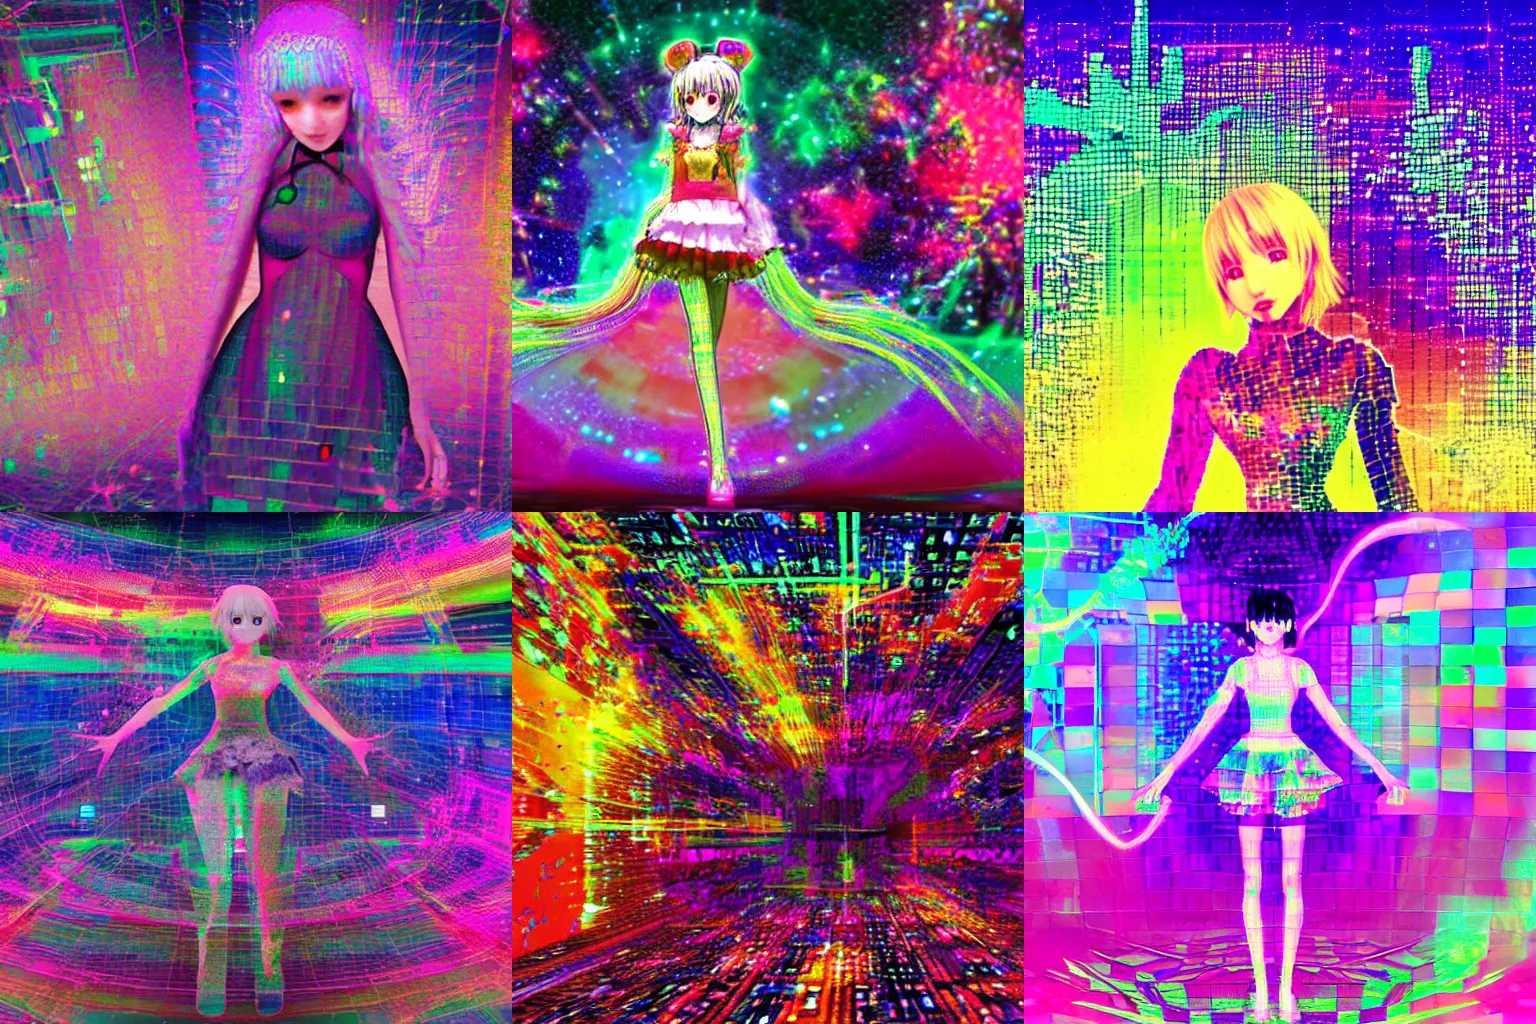 Three different images of anime girls in a cyberpunk style with rainbow lighting and a cyber background - Scenecore